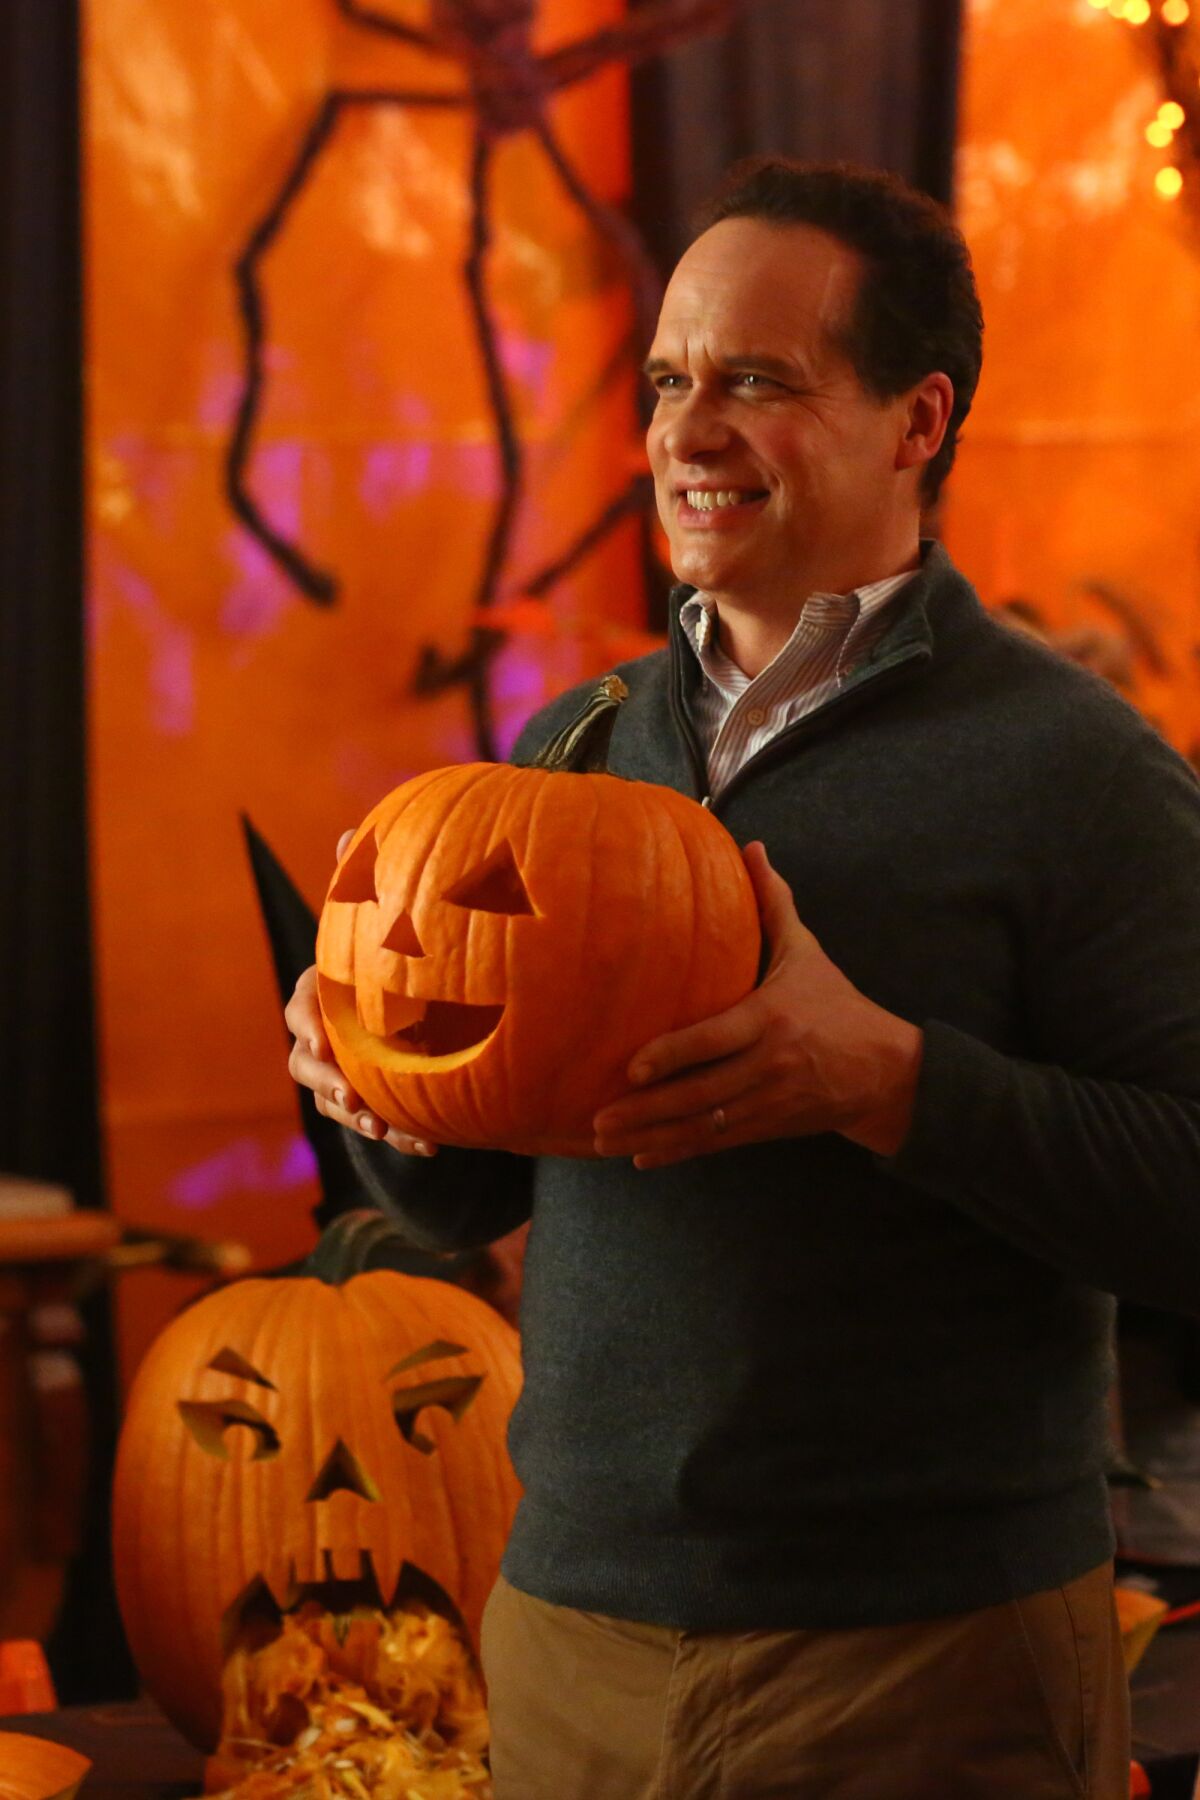 Diedrich Bader in a Halloween-themed episode of the family comedy "American Housewife" on ABC.